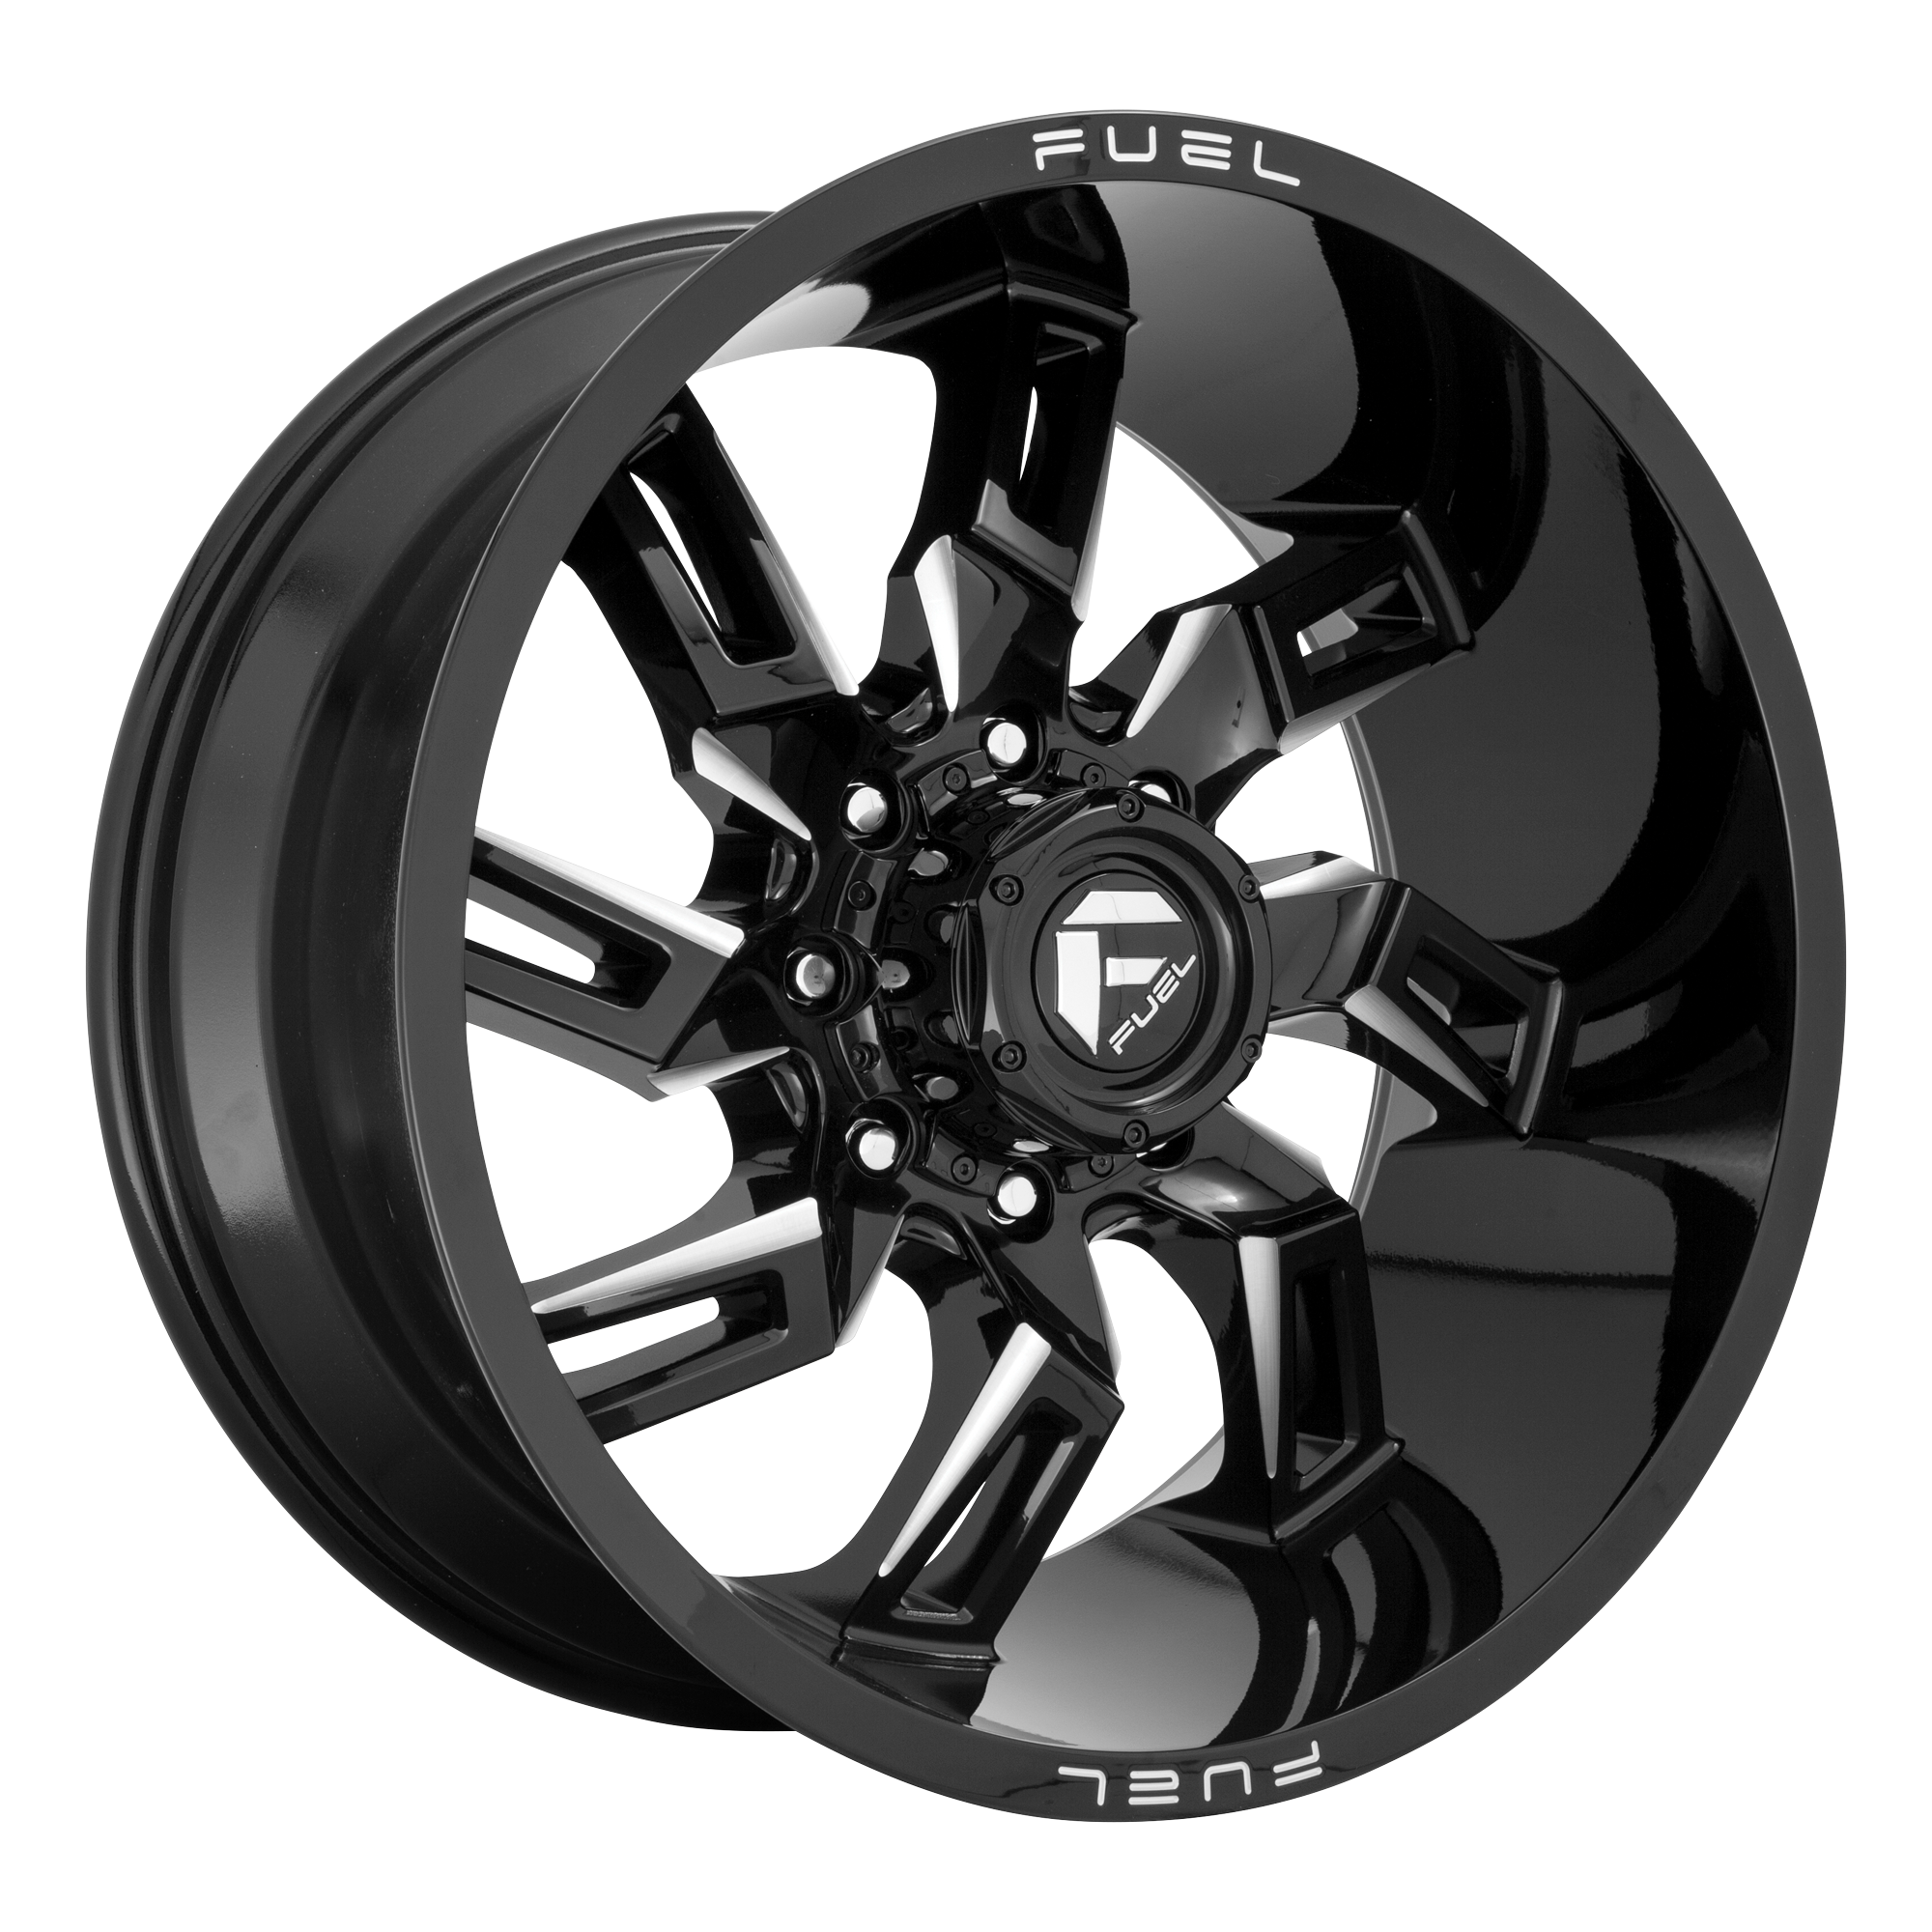 LOCKDOWN 20x10 6x135.00 GLOSS BLACK MILLED (-18 mm) - Tires and Engine Performance